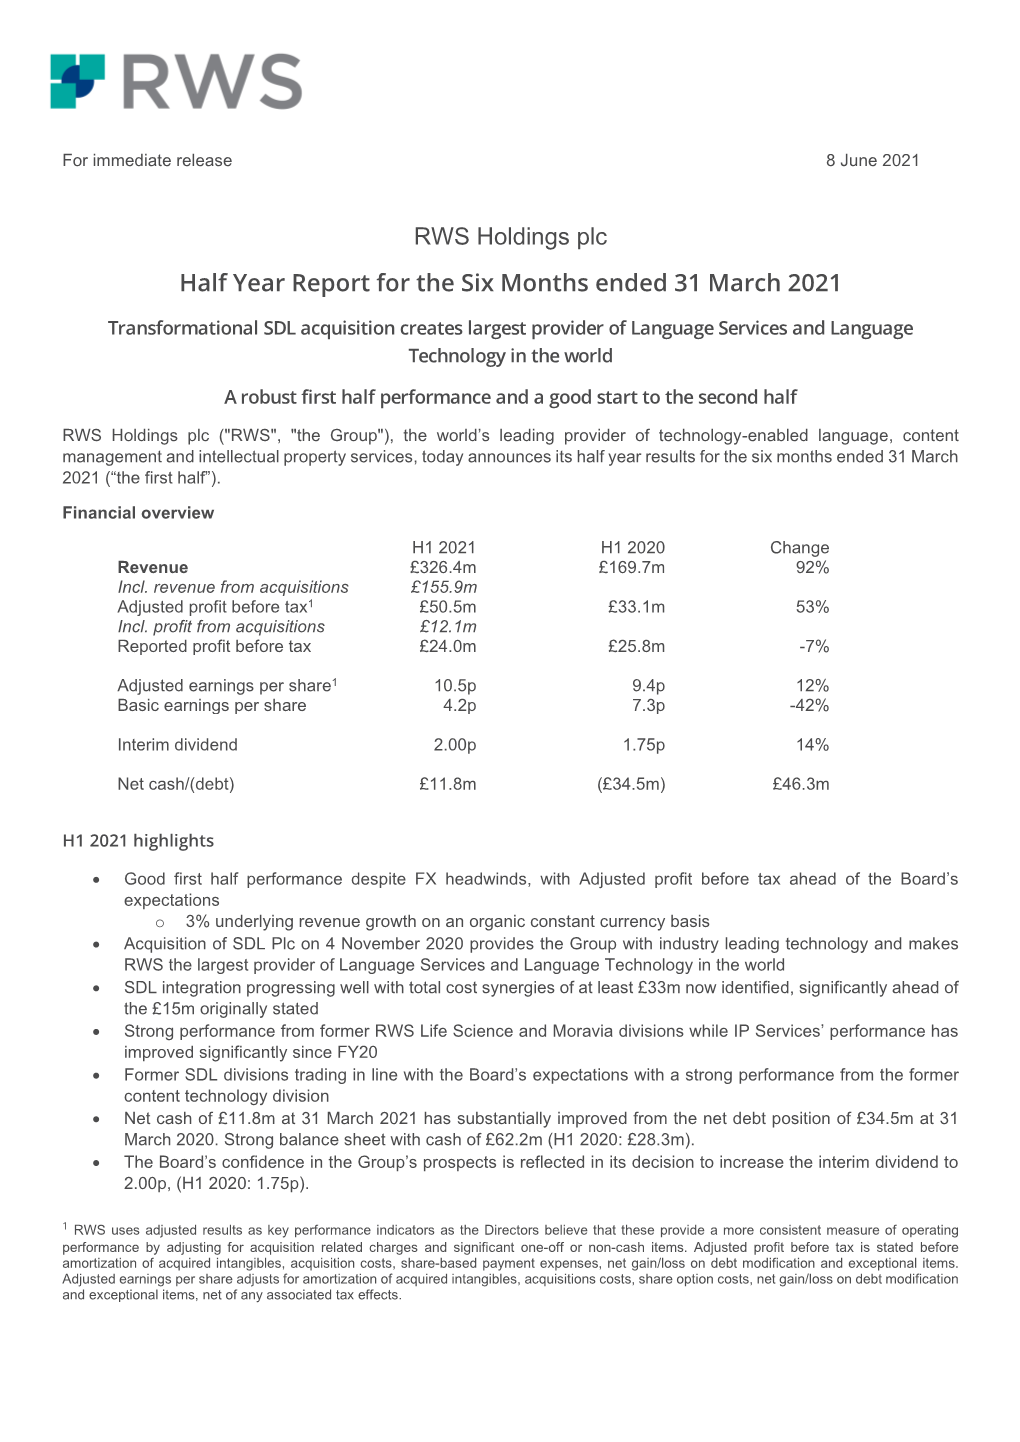 RWS Holdings Plc Half Year Report for the Six Months Ended 31 March 2021